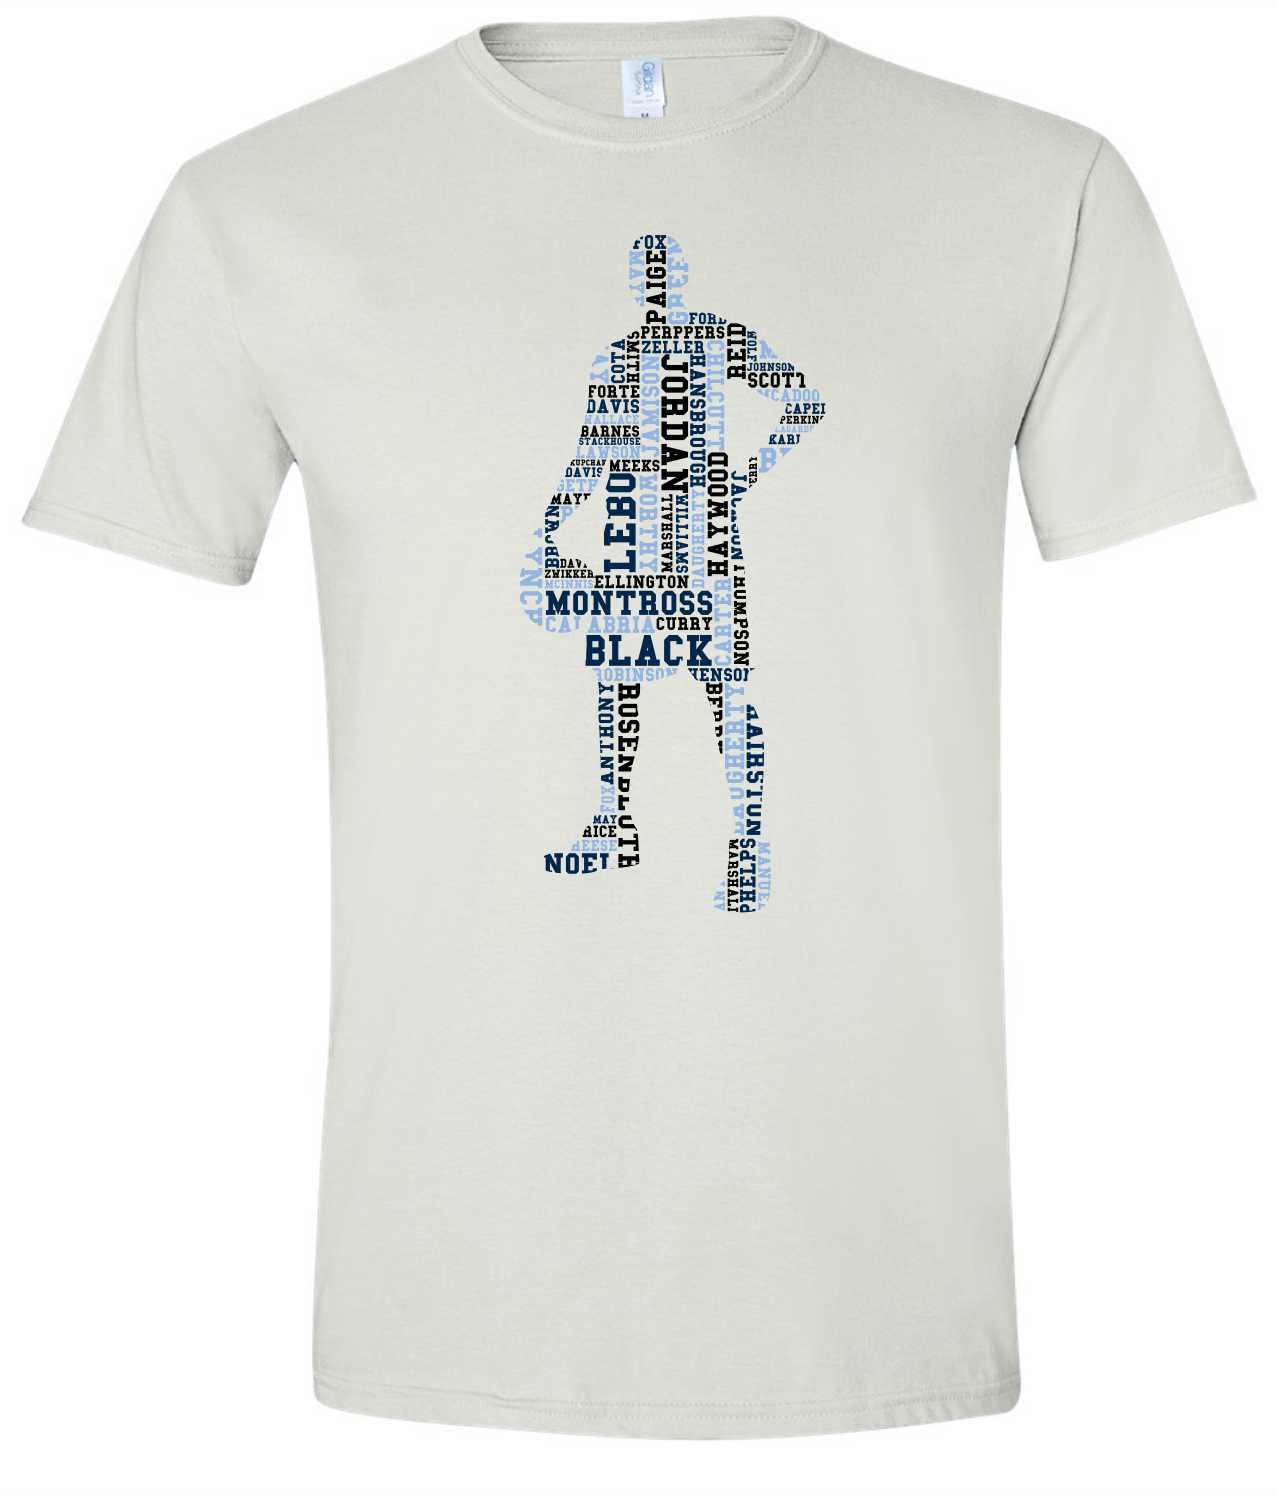 Favorite UNC Basketball Players Outline T-Shirt